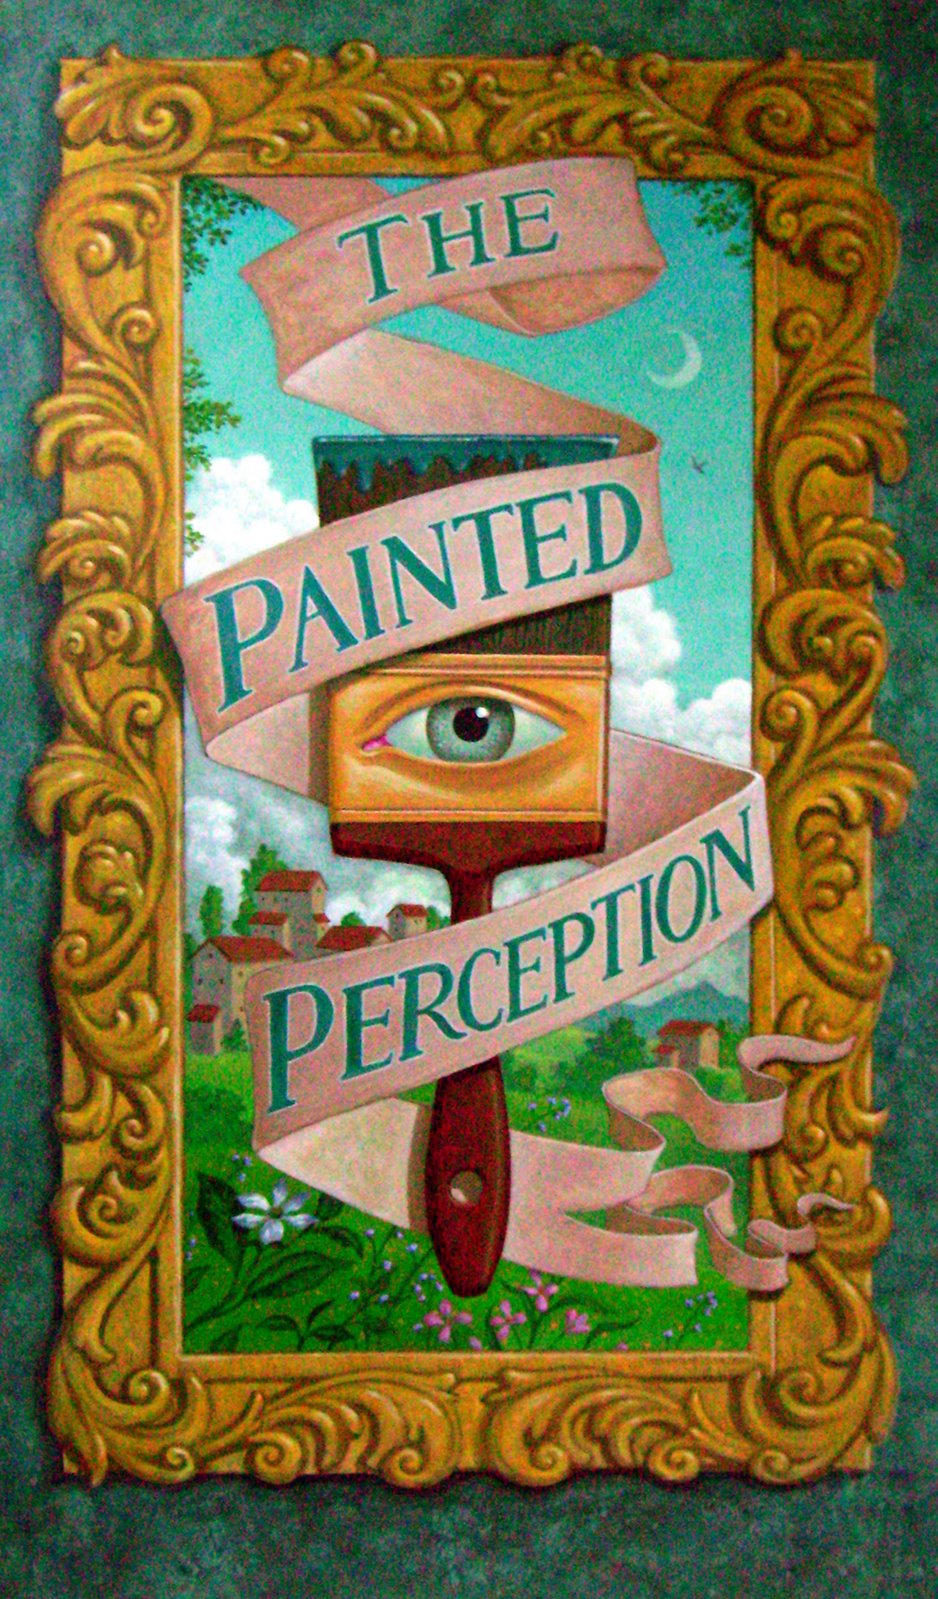 [the+painted+perception.jpg]